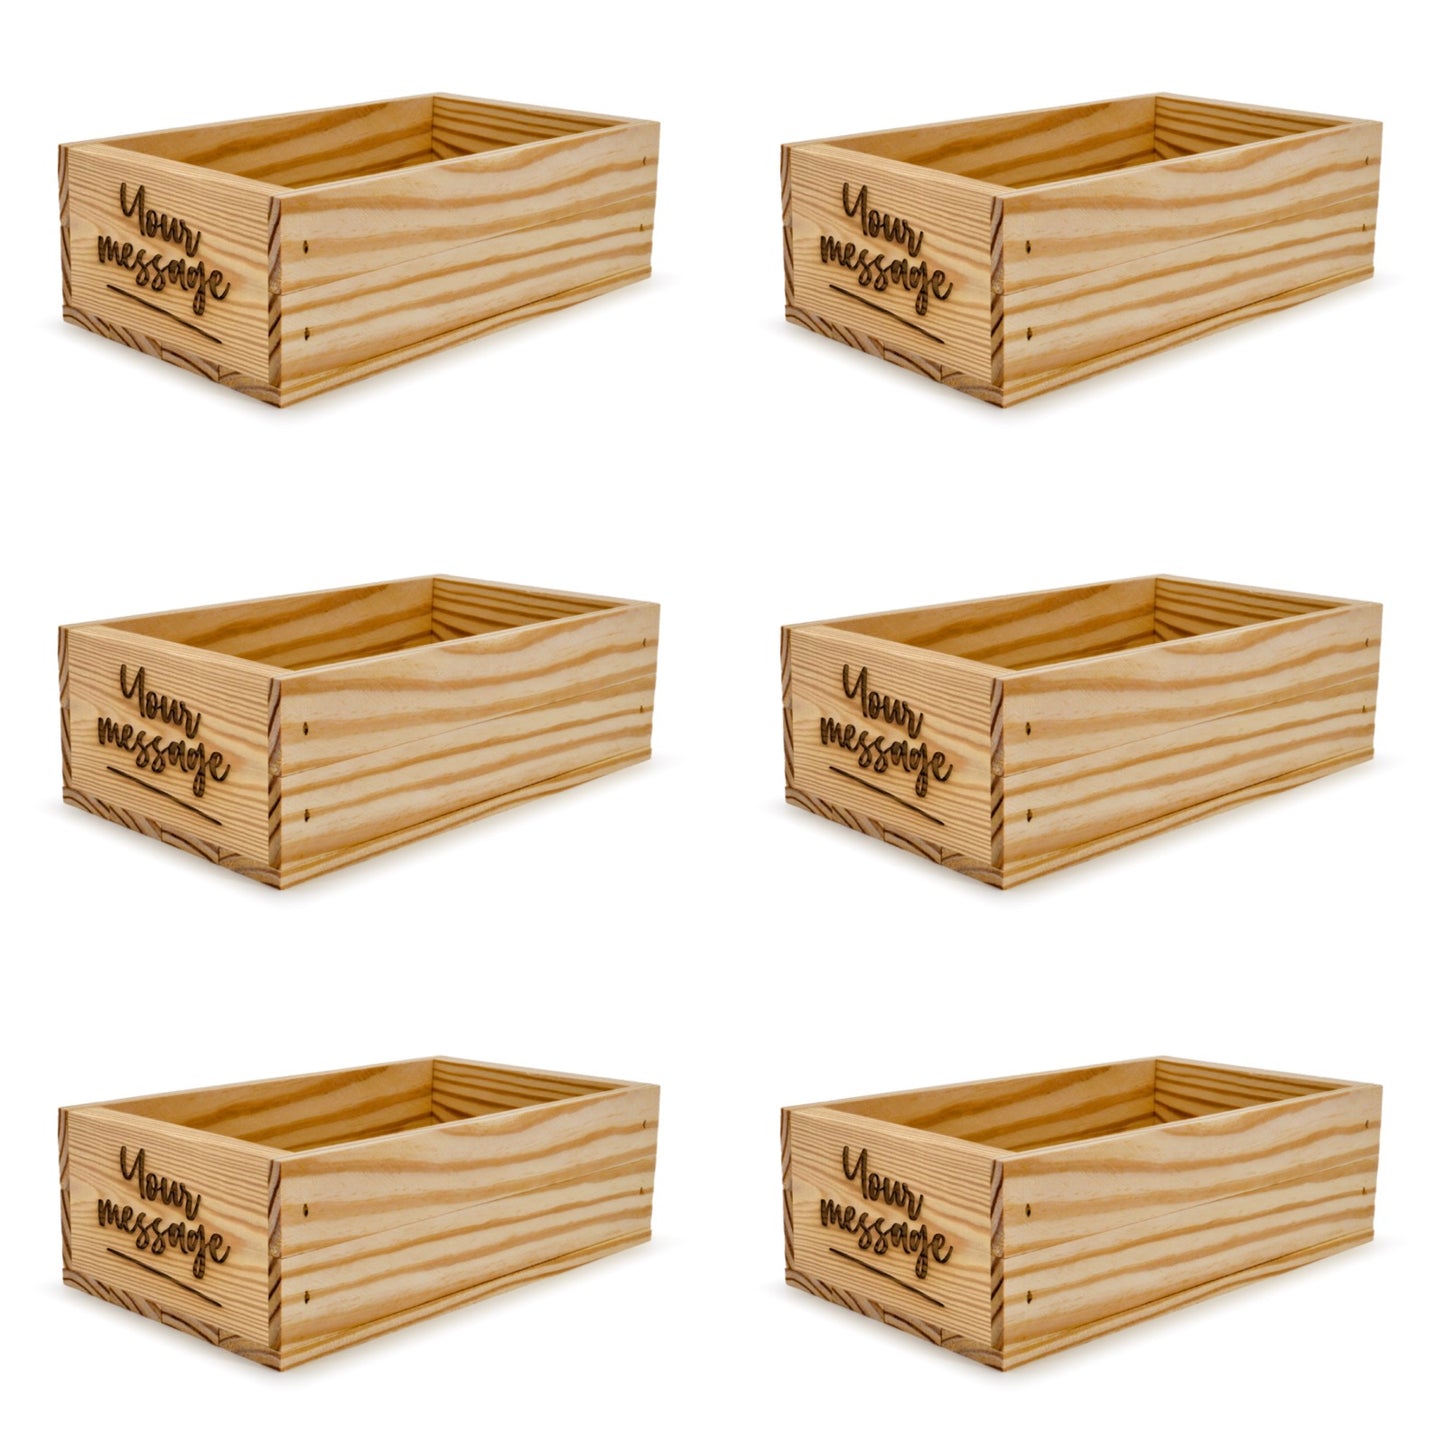 6 Small wooden crates with custom message 11x6.25x3.5